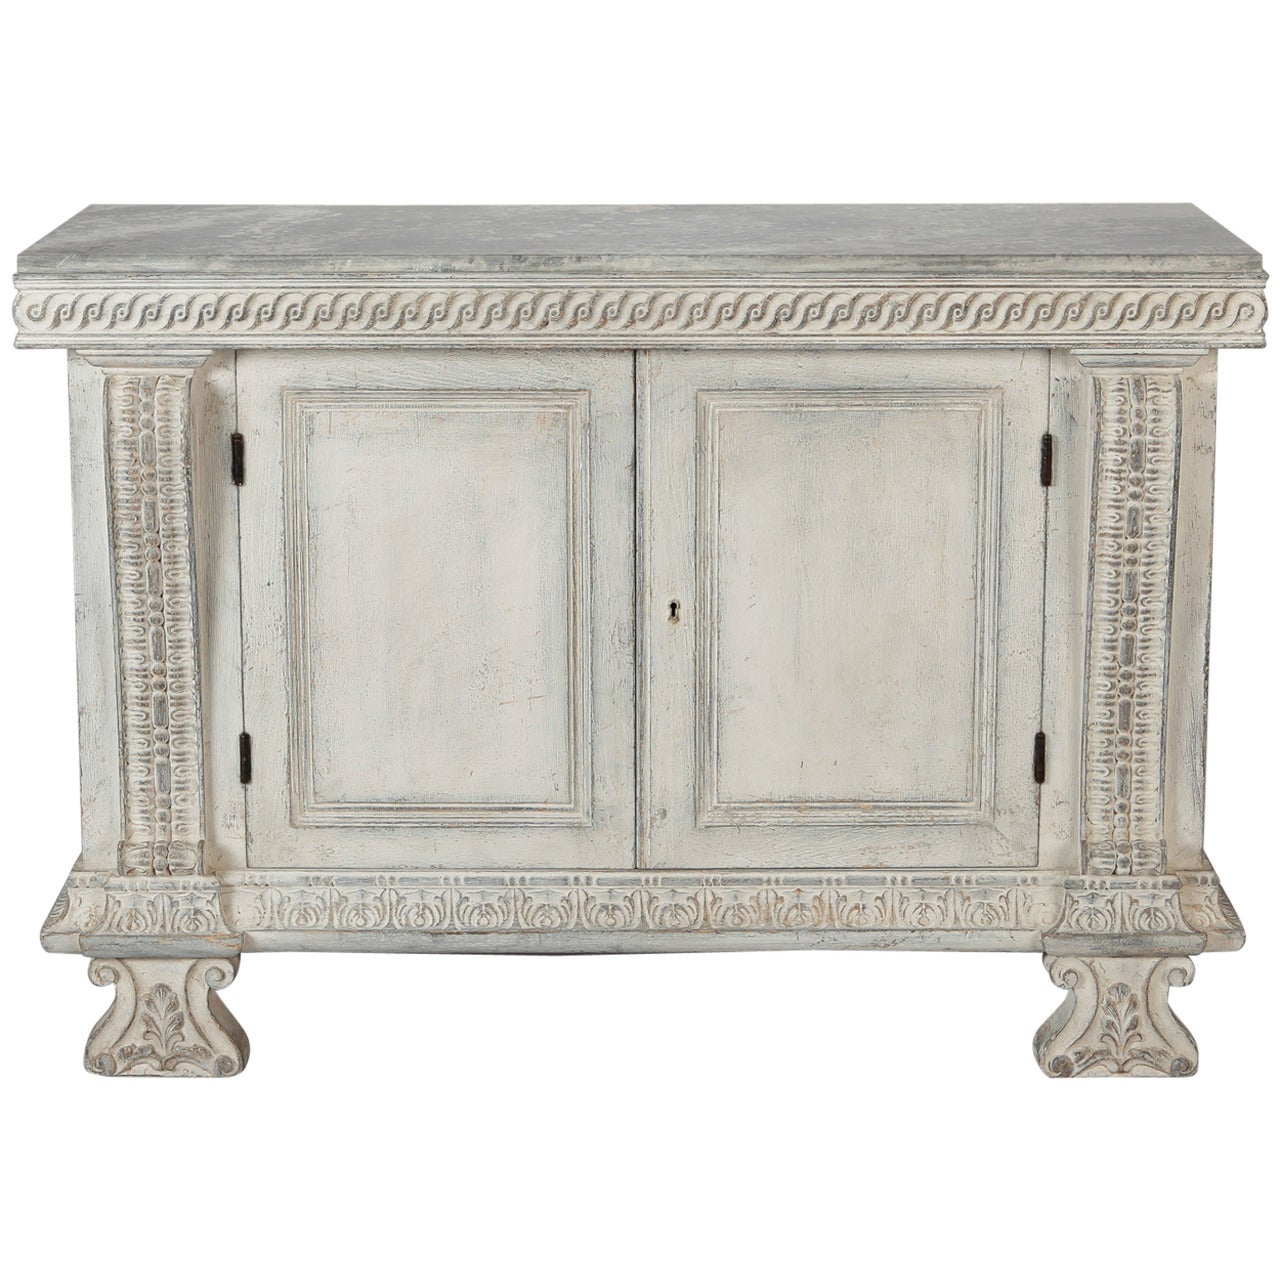 Italian Two-Door Chest with Faux Painted-Top and Carved Details